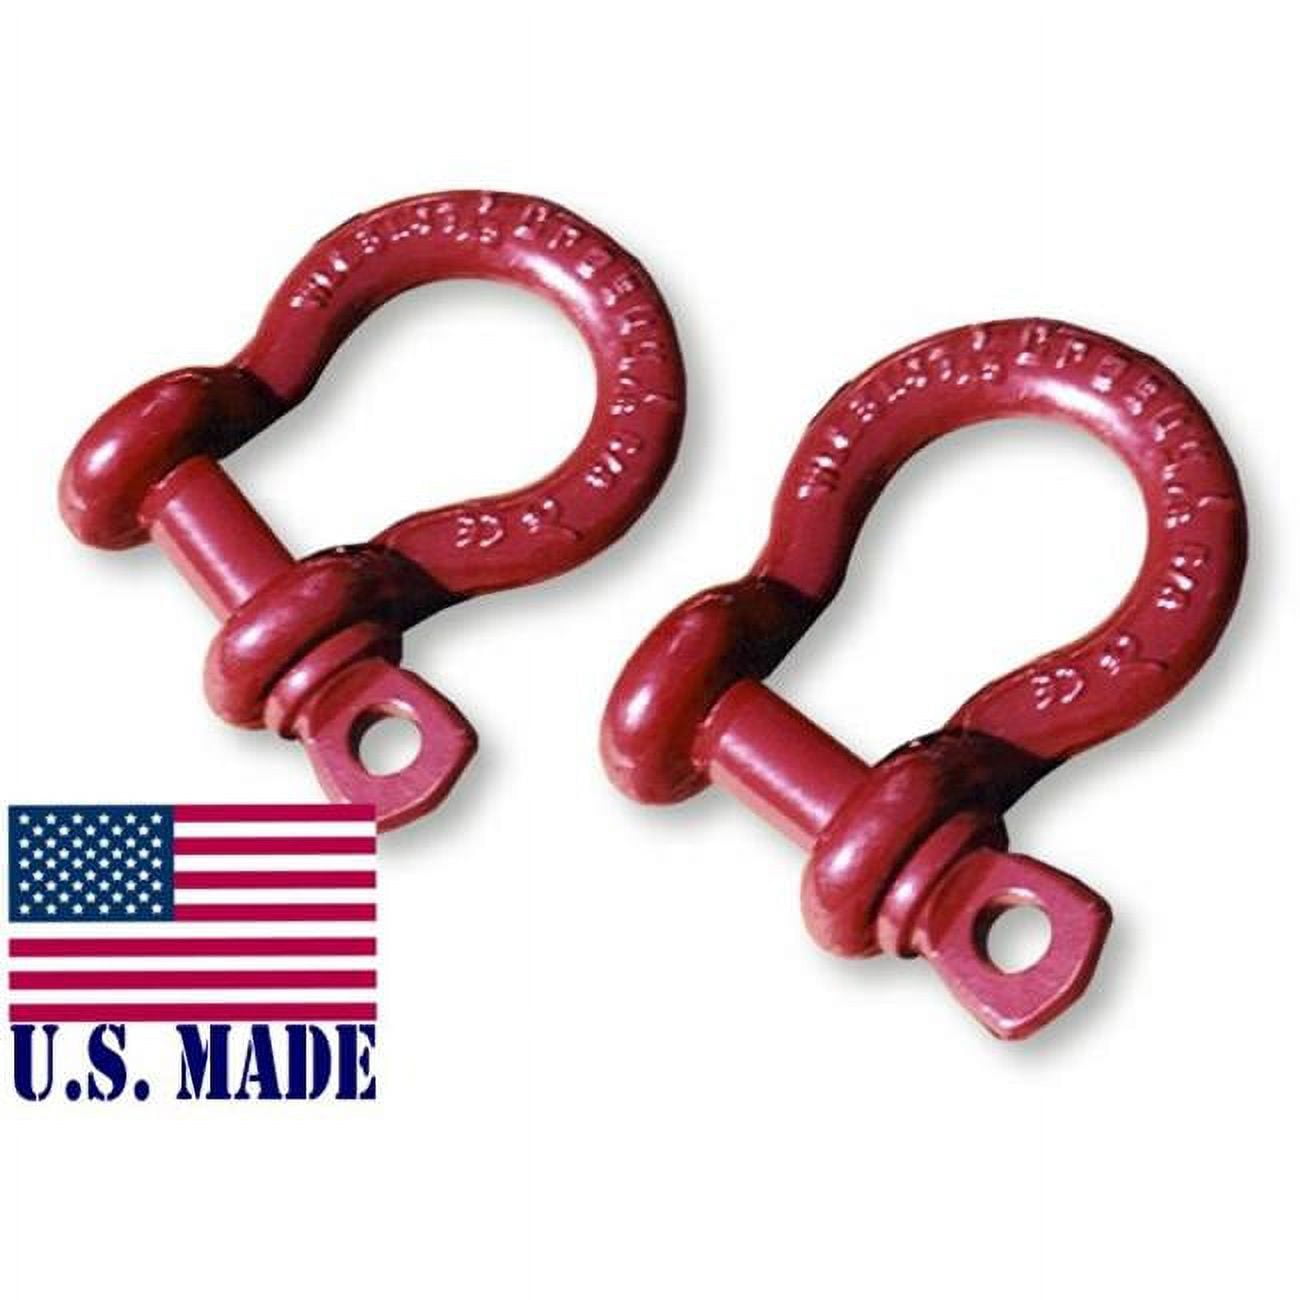 Picture of 1/2 inch ATV Crosby-McKissick D-Shackles - North American Made (PAIR) (4X4 VEHICLE RECOVERY)